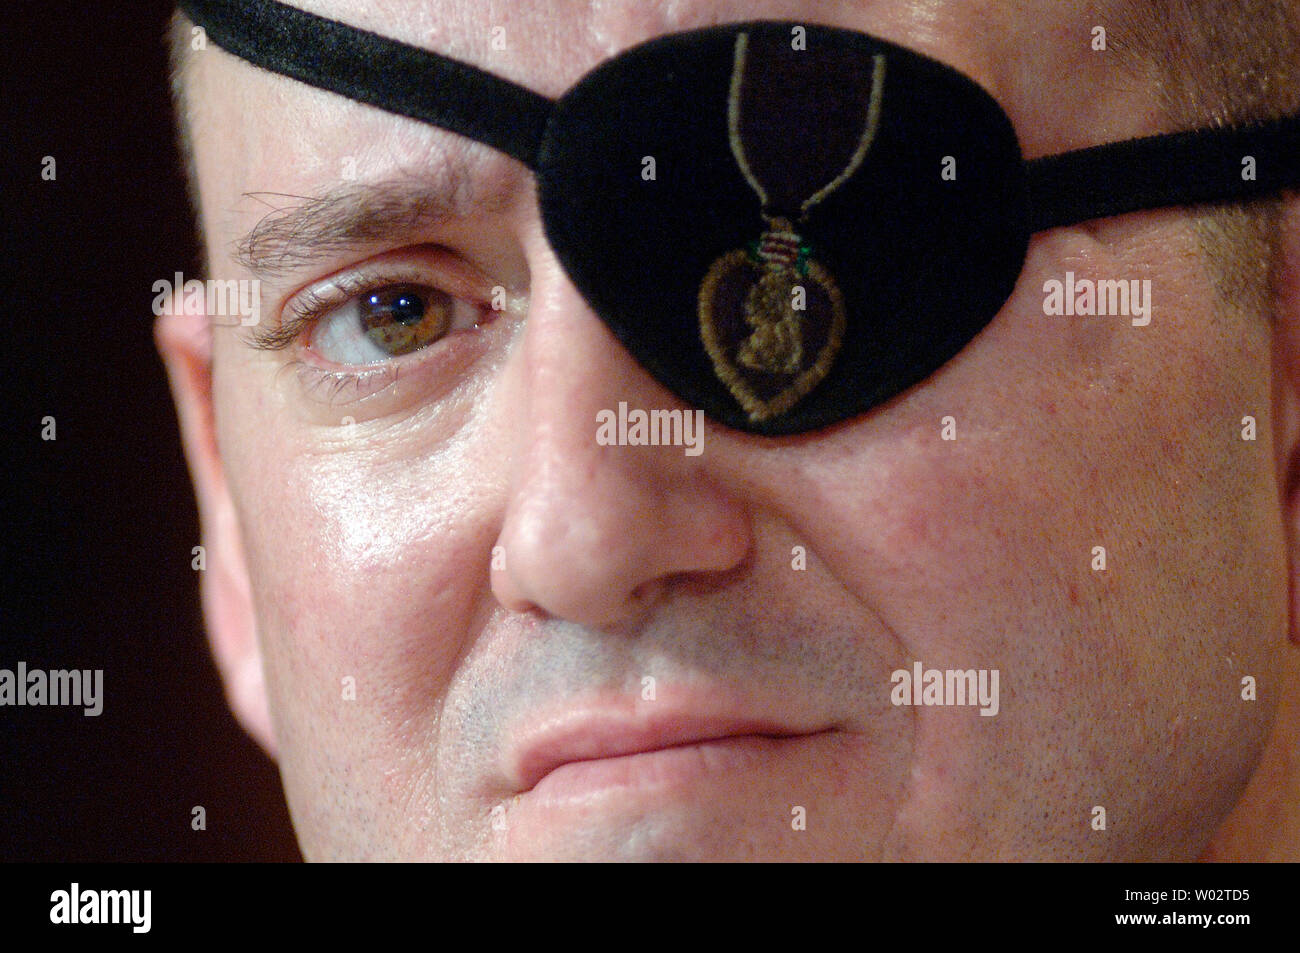 Army Staff Sgt. John Daniel Shannon, who lost his eye in combat operations in Iraq and received treatment at the Walter Reed Army Medical Center, testifies to a House Oversight and Government Reform Committee Hearing on the care and conditions of wounded soldiers at Walter Reed Army Medical Center, in Washington on March 5, 2007. (UPI Photo/Kevin Dietsch) Stock Photo